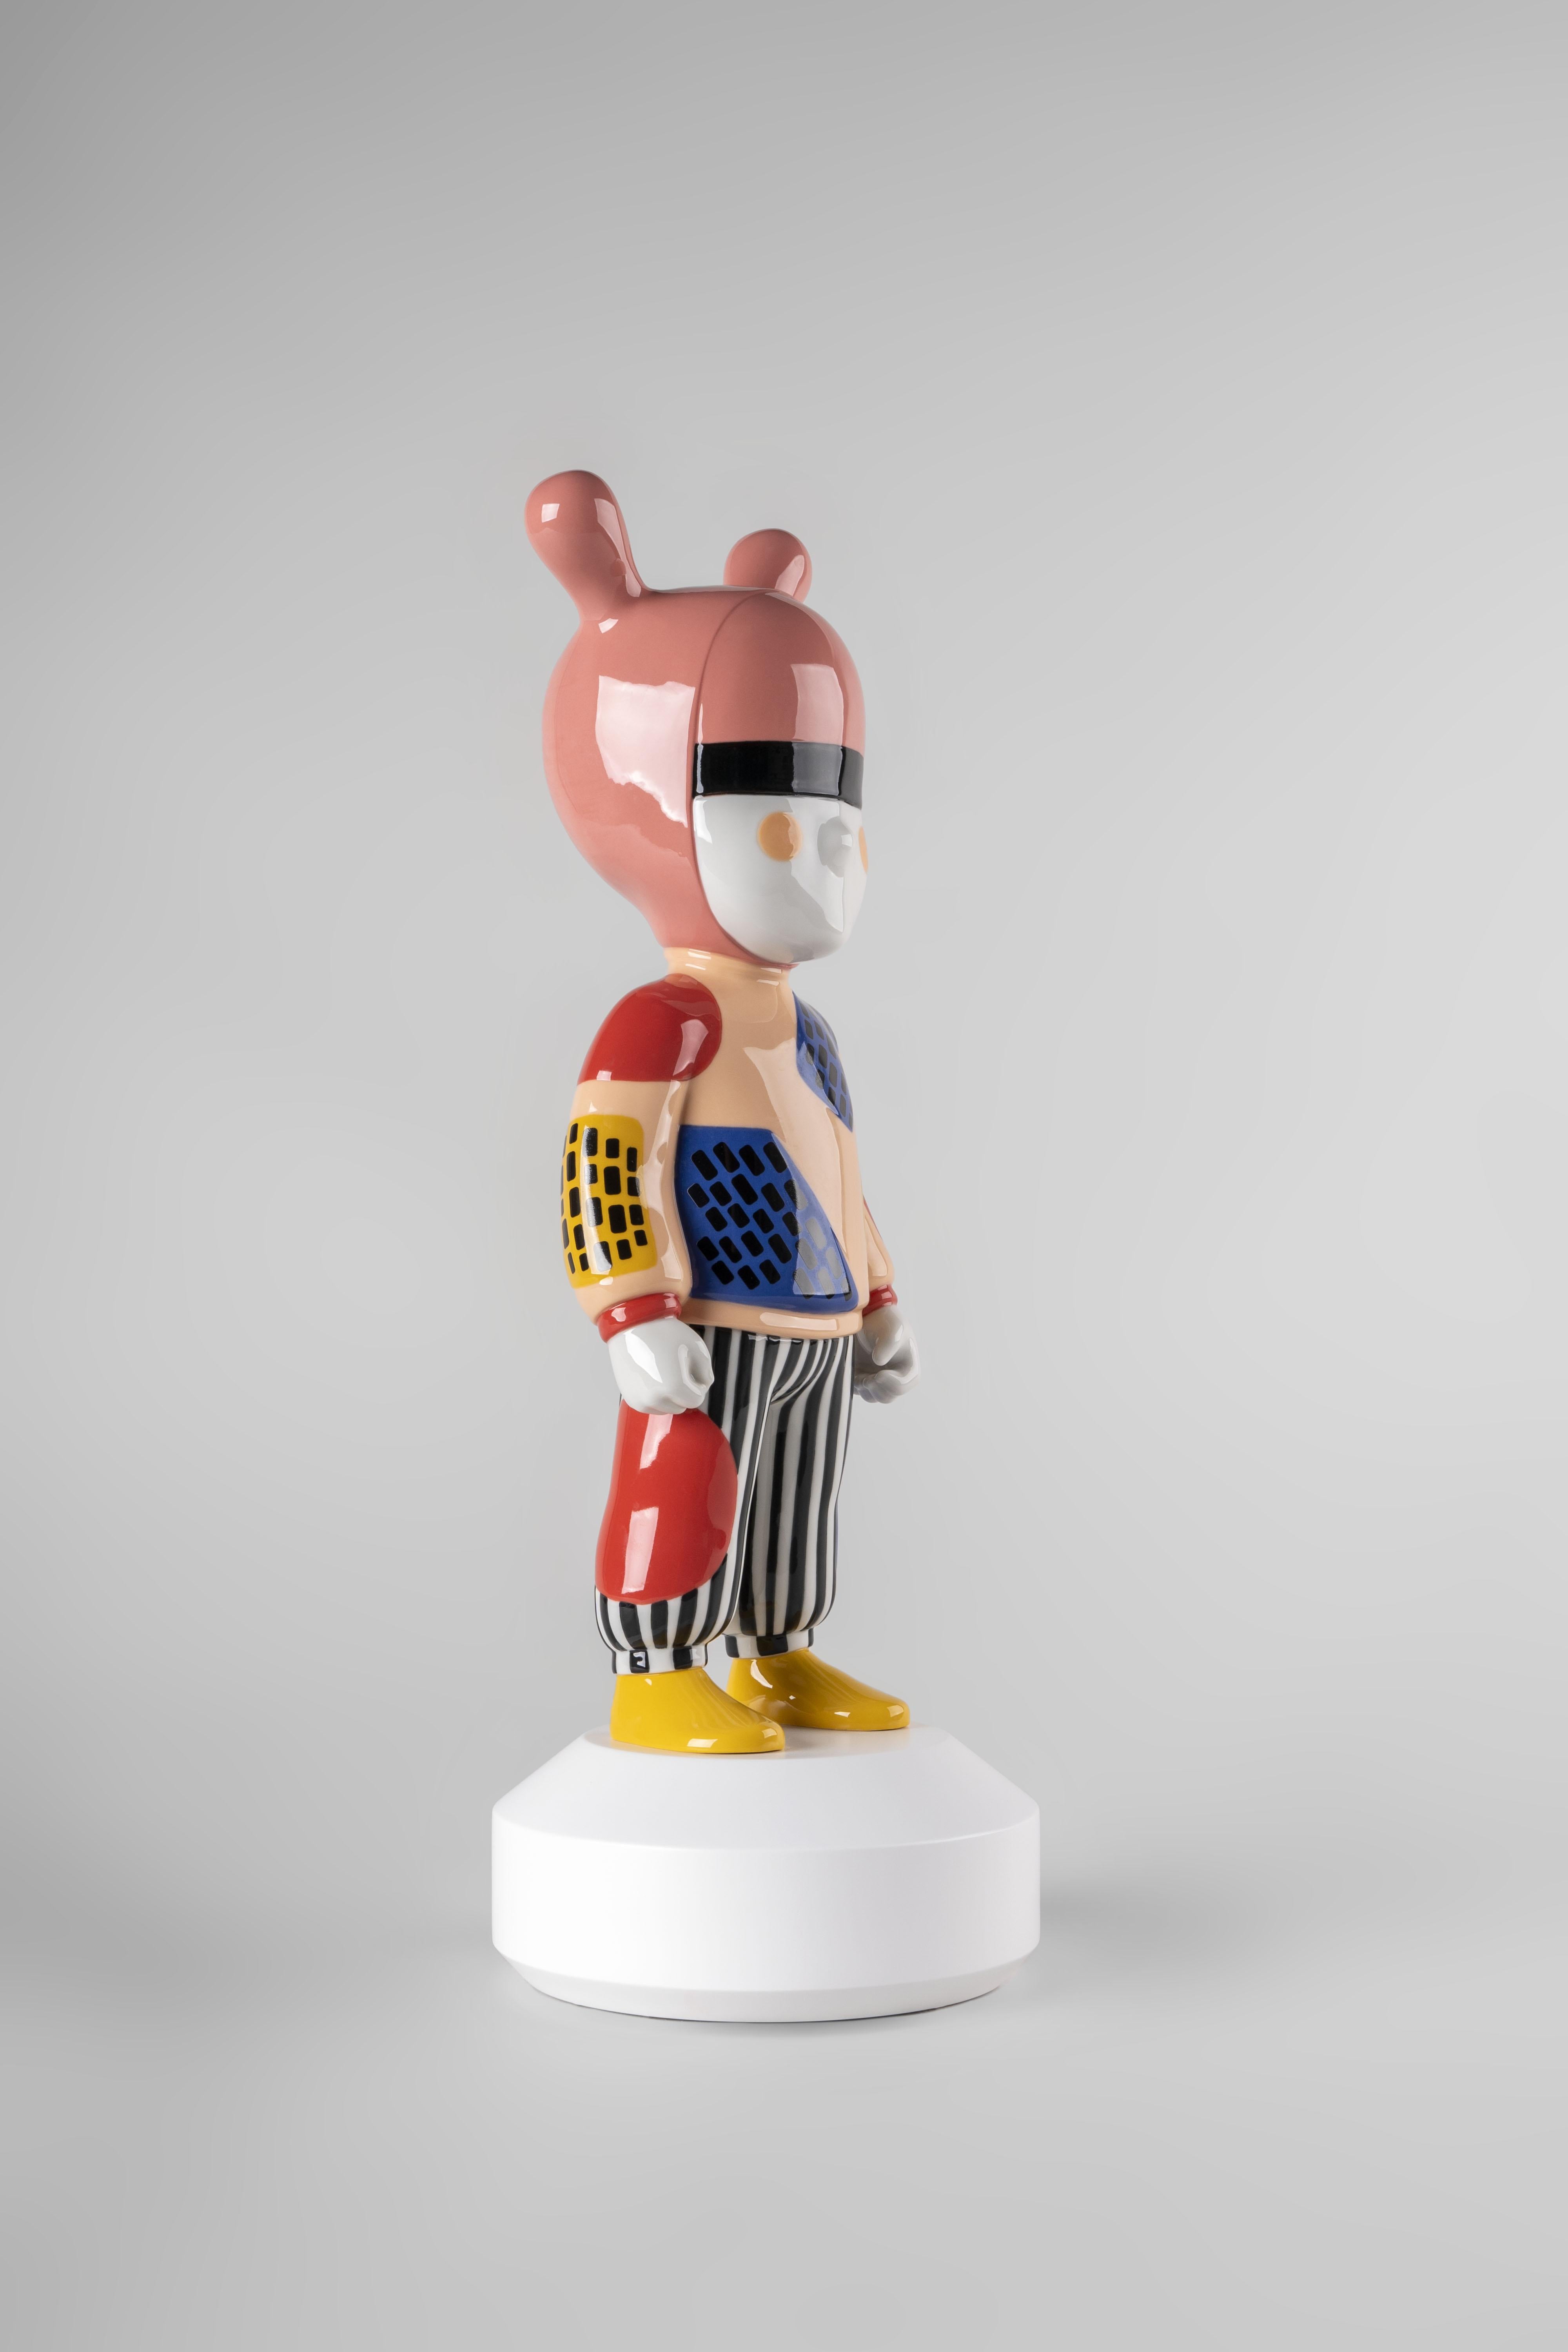 Hand-Crafted The Guest by Camille Walala - Big Sculpture. Limited Edition For Sale